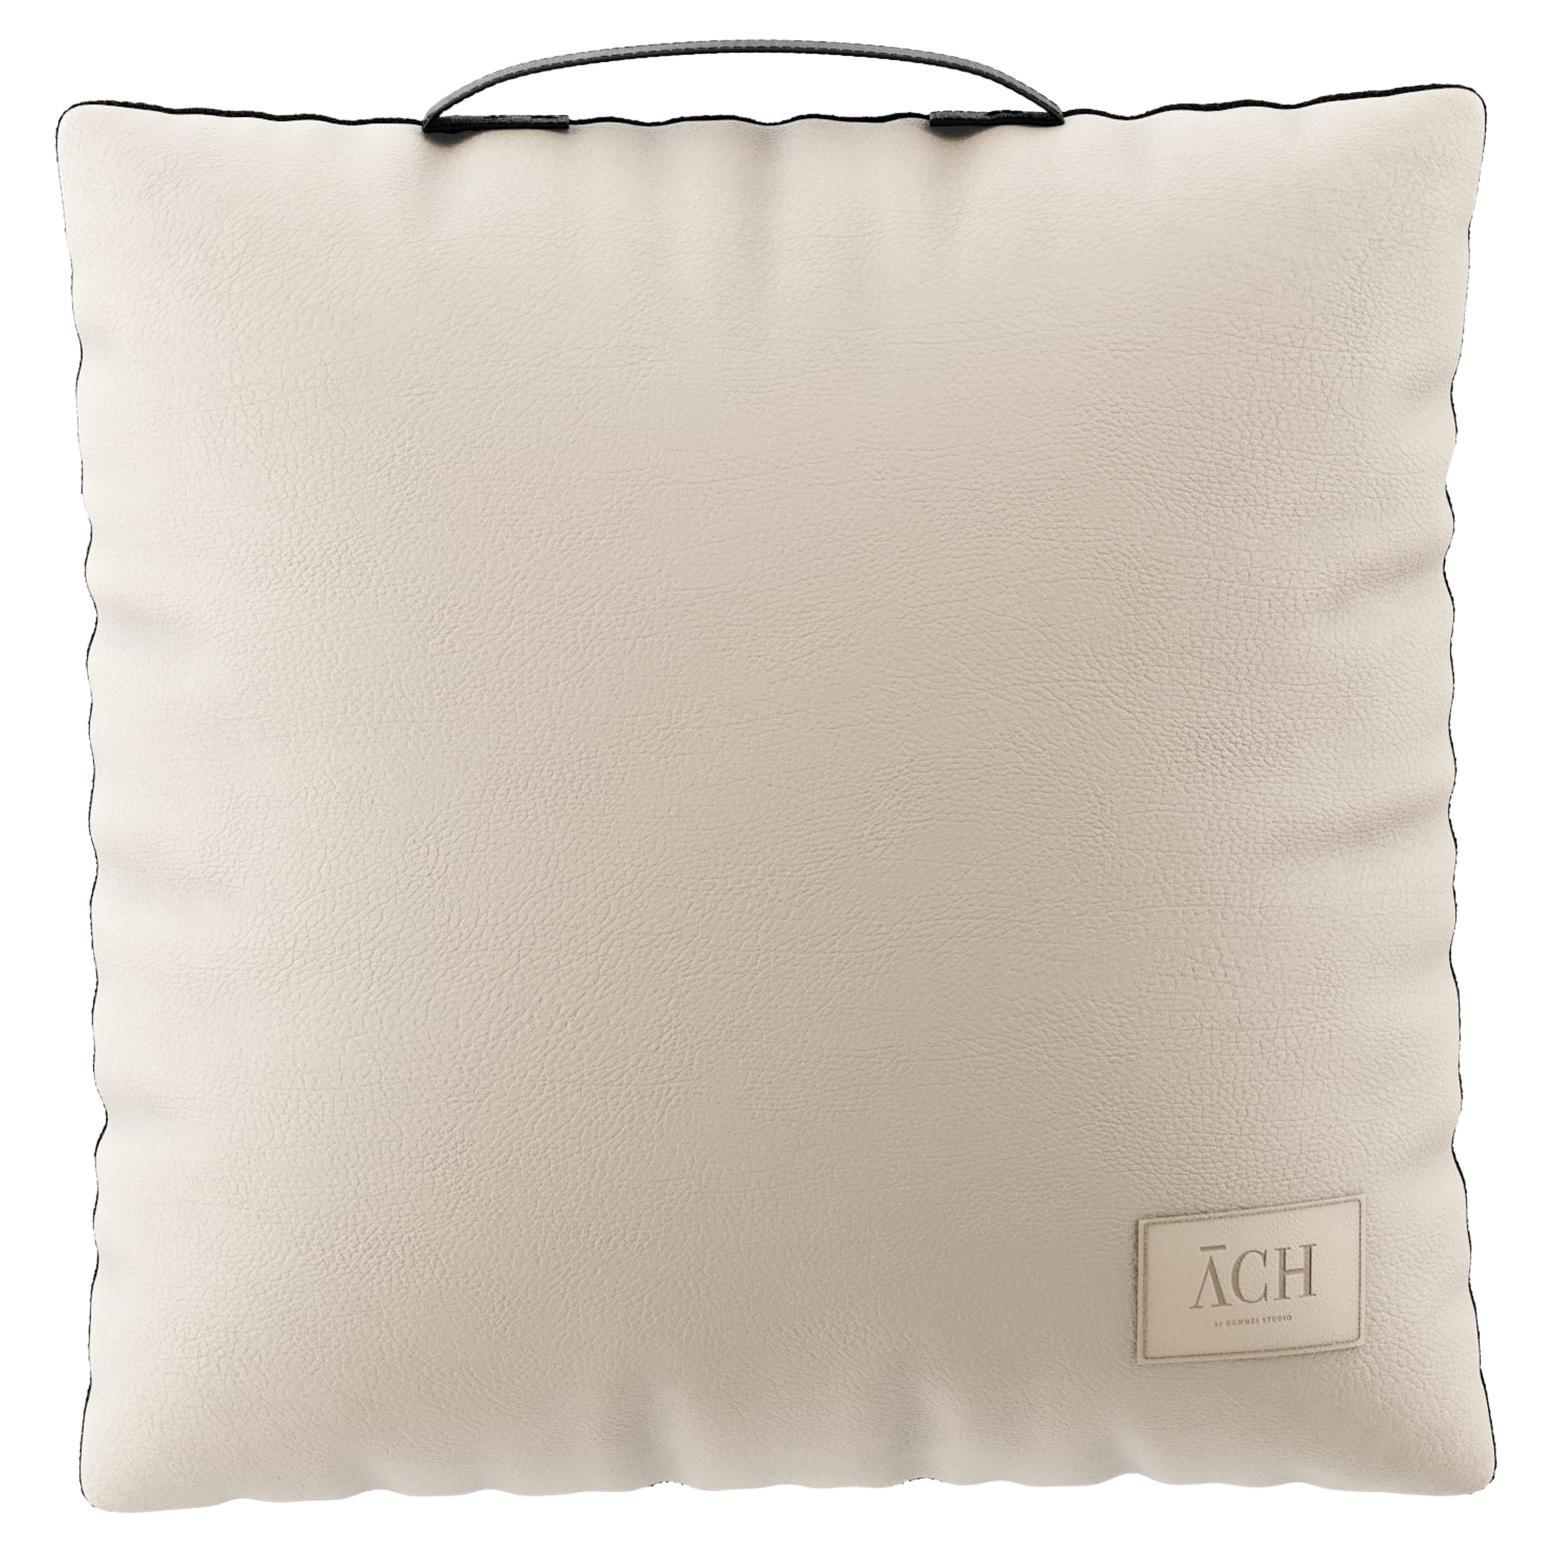 Pearl Outdoor Throw Pillow, Modern Waterproof Square Cushion Decor Handle